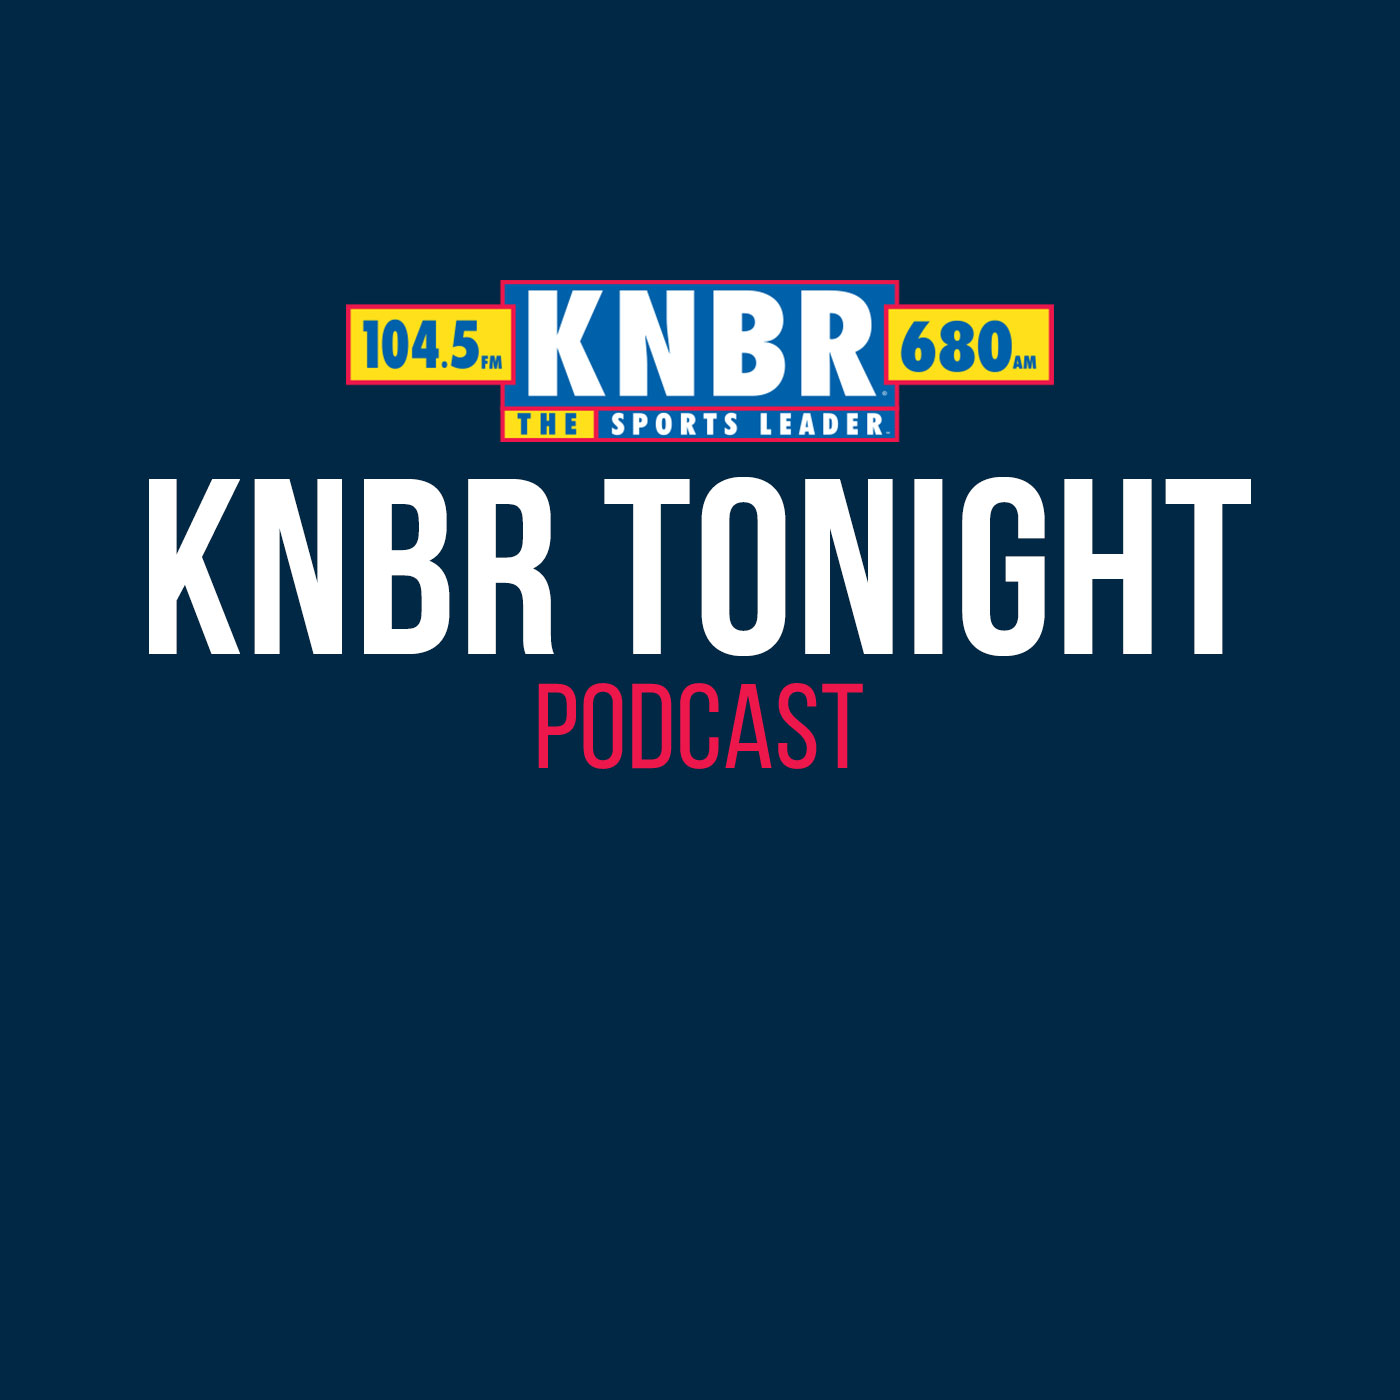 10-13 Sarah Langs joins KNBR Tonight with Kerry to talk about about NLDS Game 5 Giants vs Dodgers coming up tomorrow